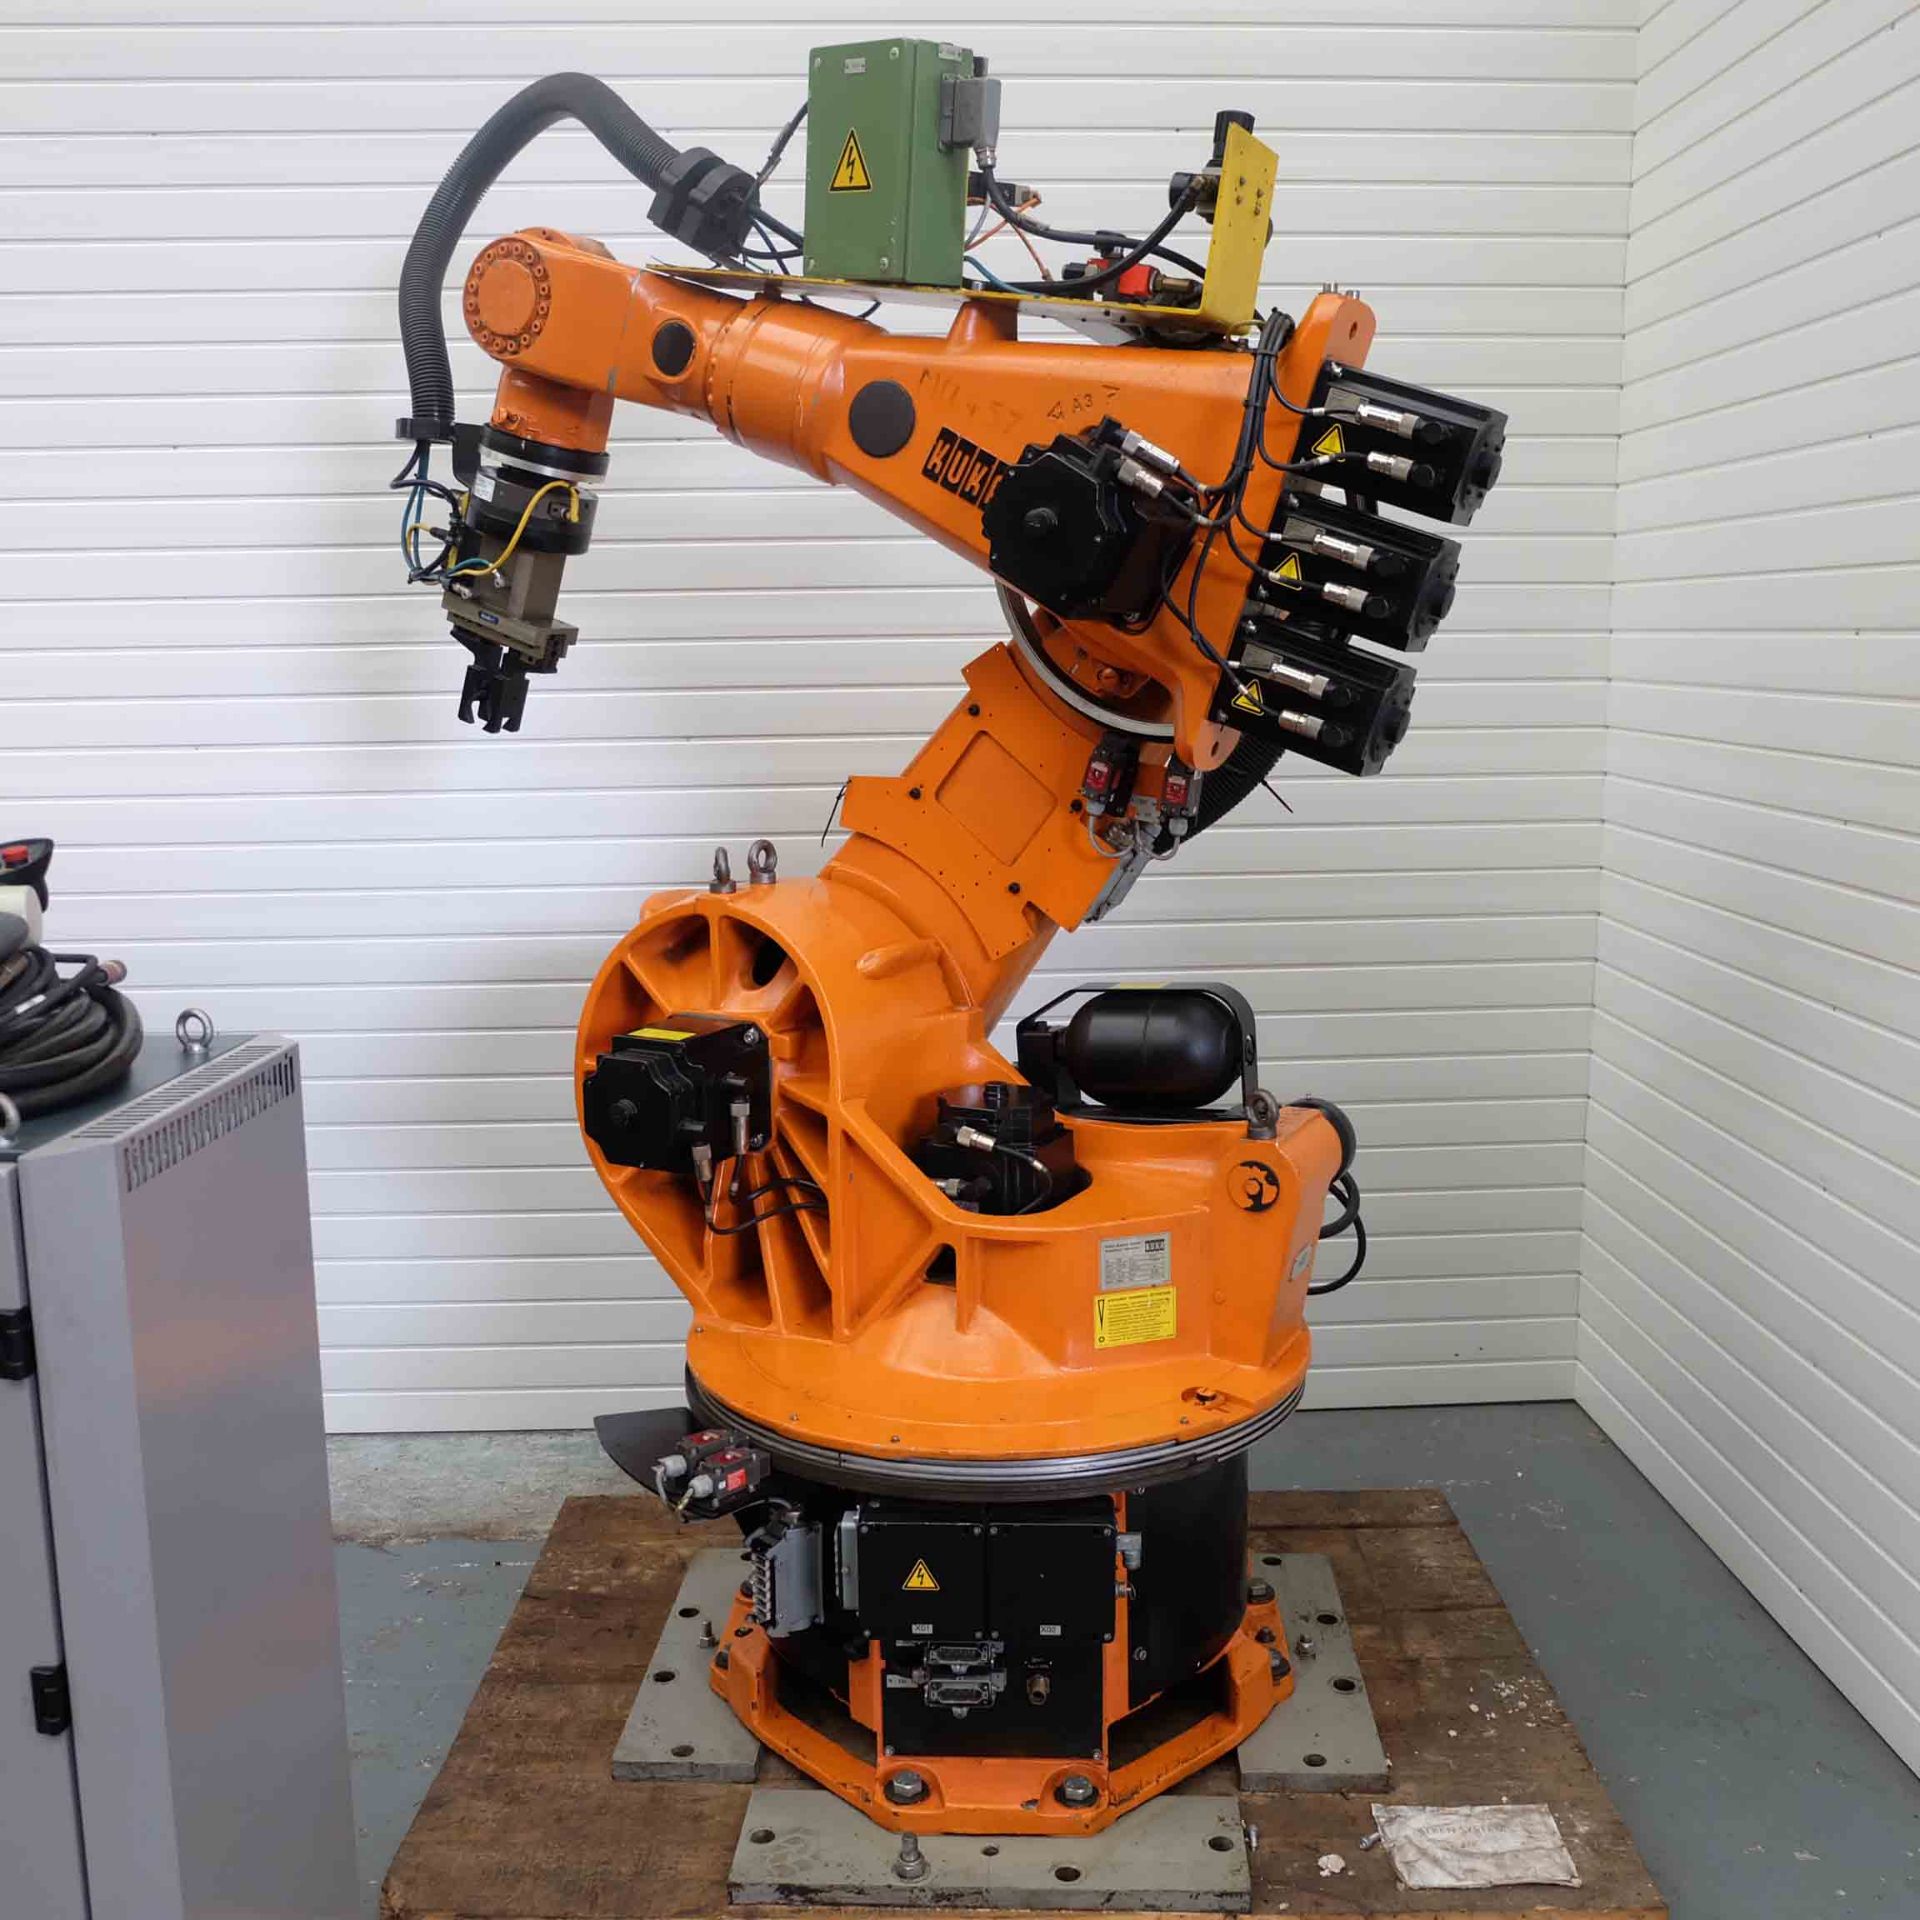 2 x Kuka Type KR125 6 Axis Robotic Arms. (1 Complete & 1 Incomplete). - Image 35 of 35